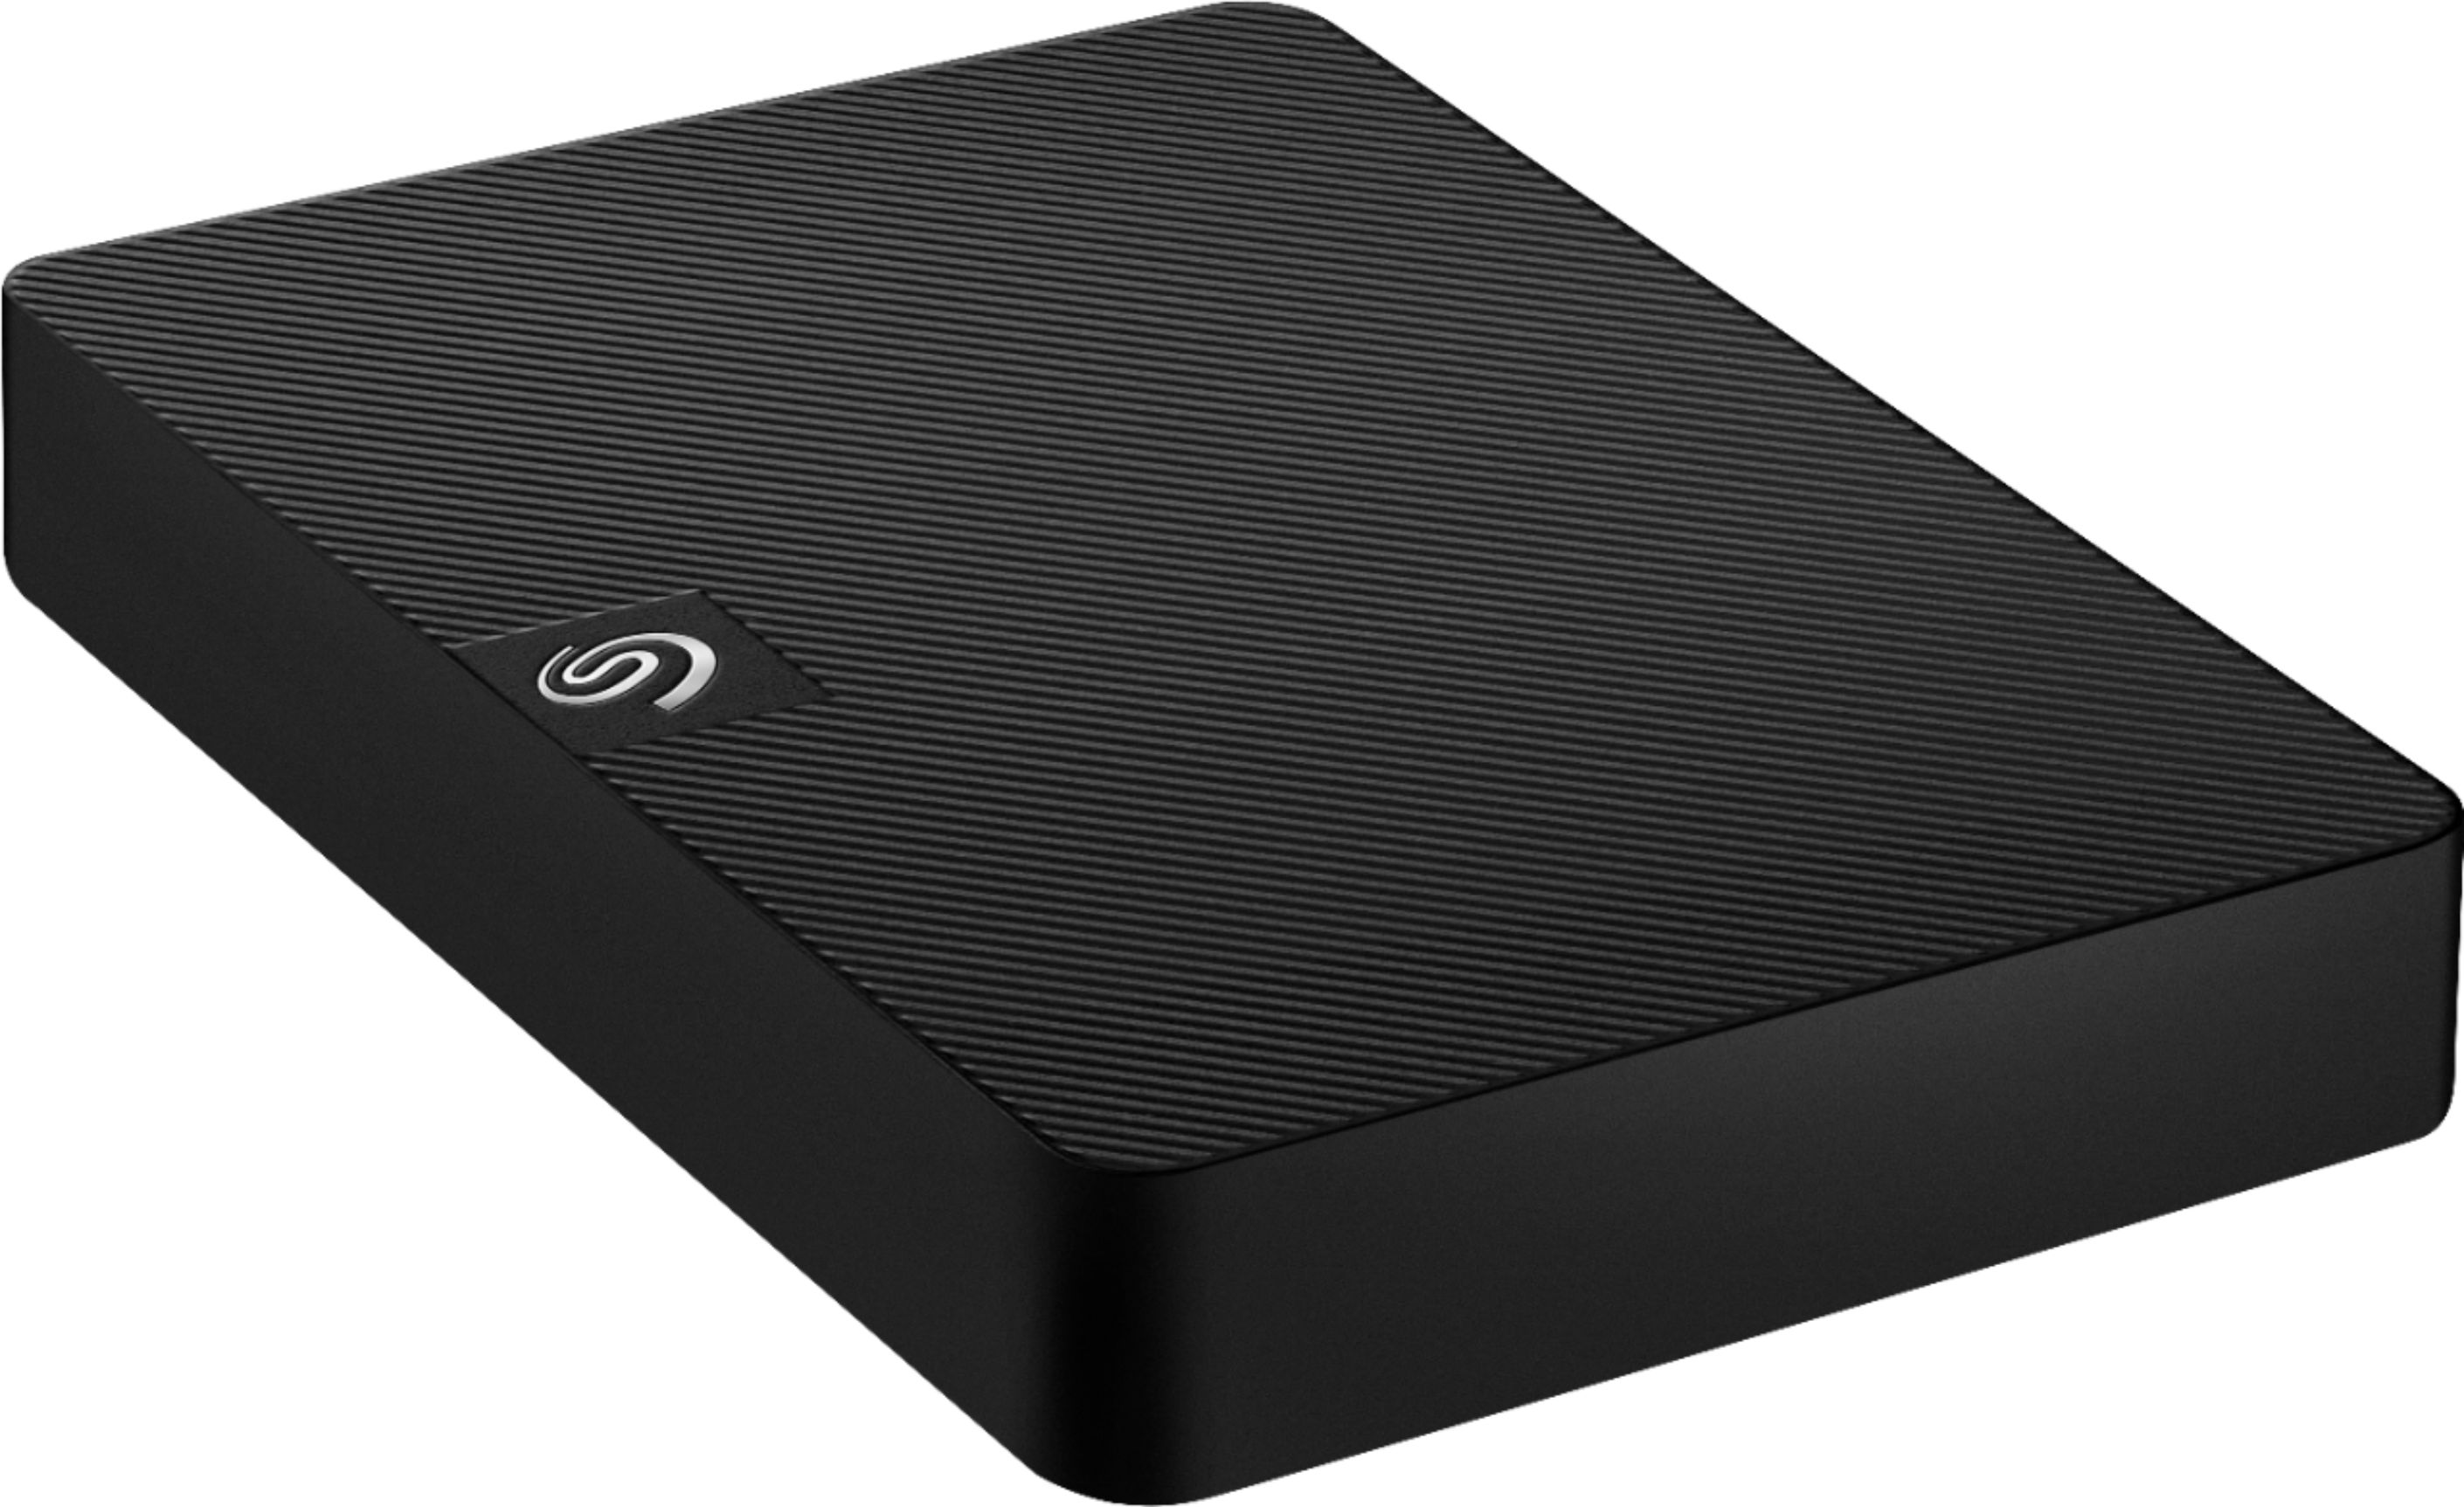 Angle View: Seagate - Expansion 5TB External USB 3.0 Portable Hard Drive with Rescue Data Recovery Services - Black